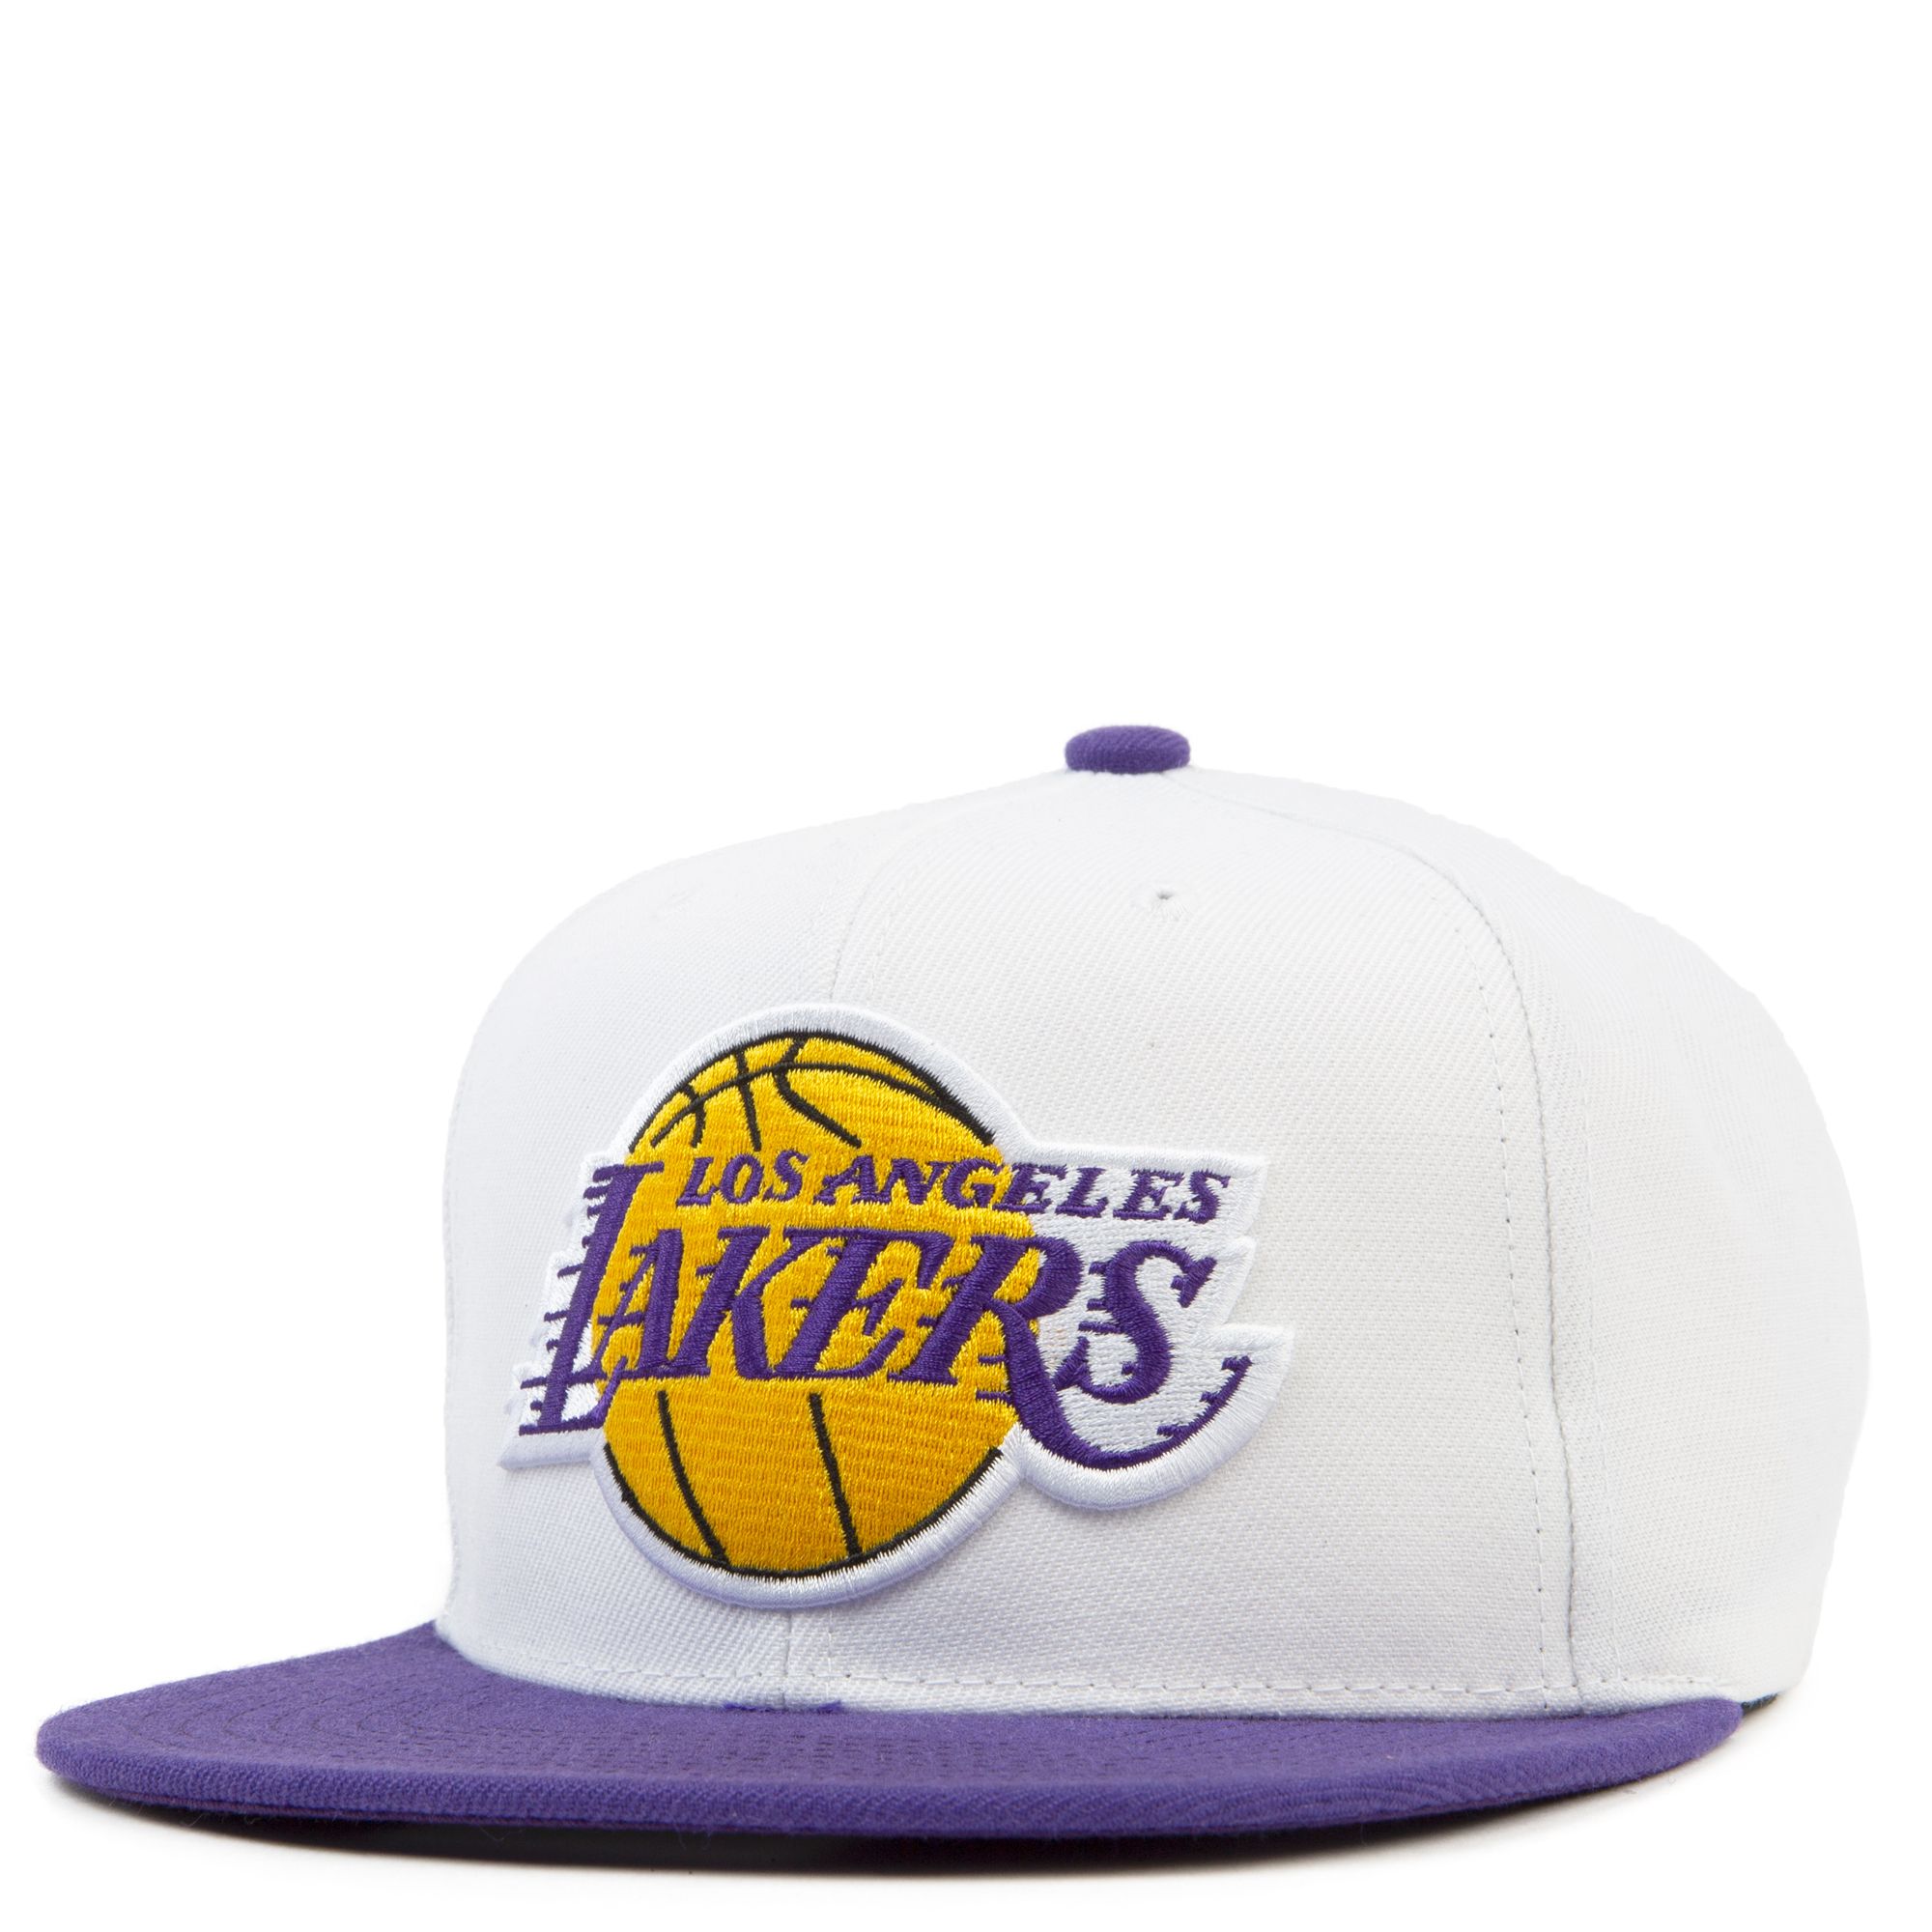 Los Angeles Lakers NBA Intl 006 Mitchell and Ness lilac gray Cap